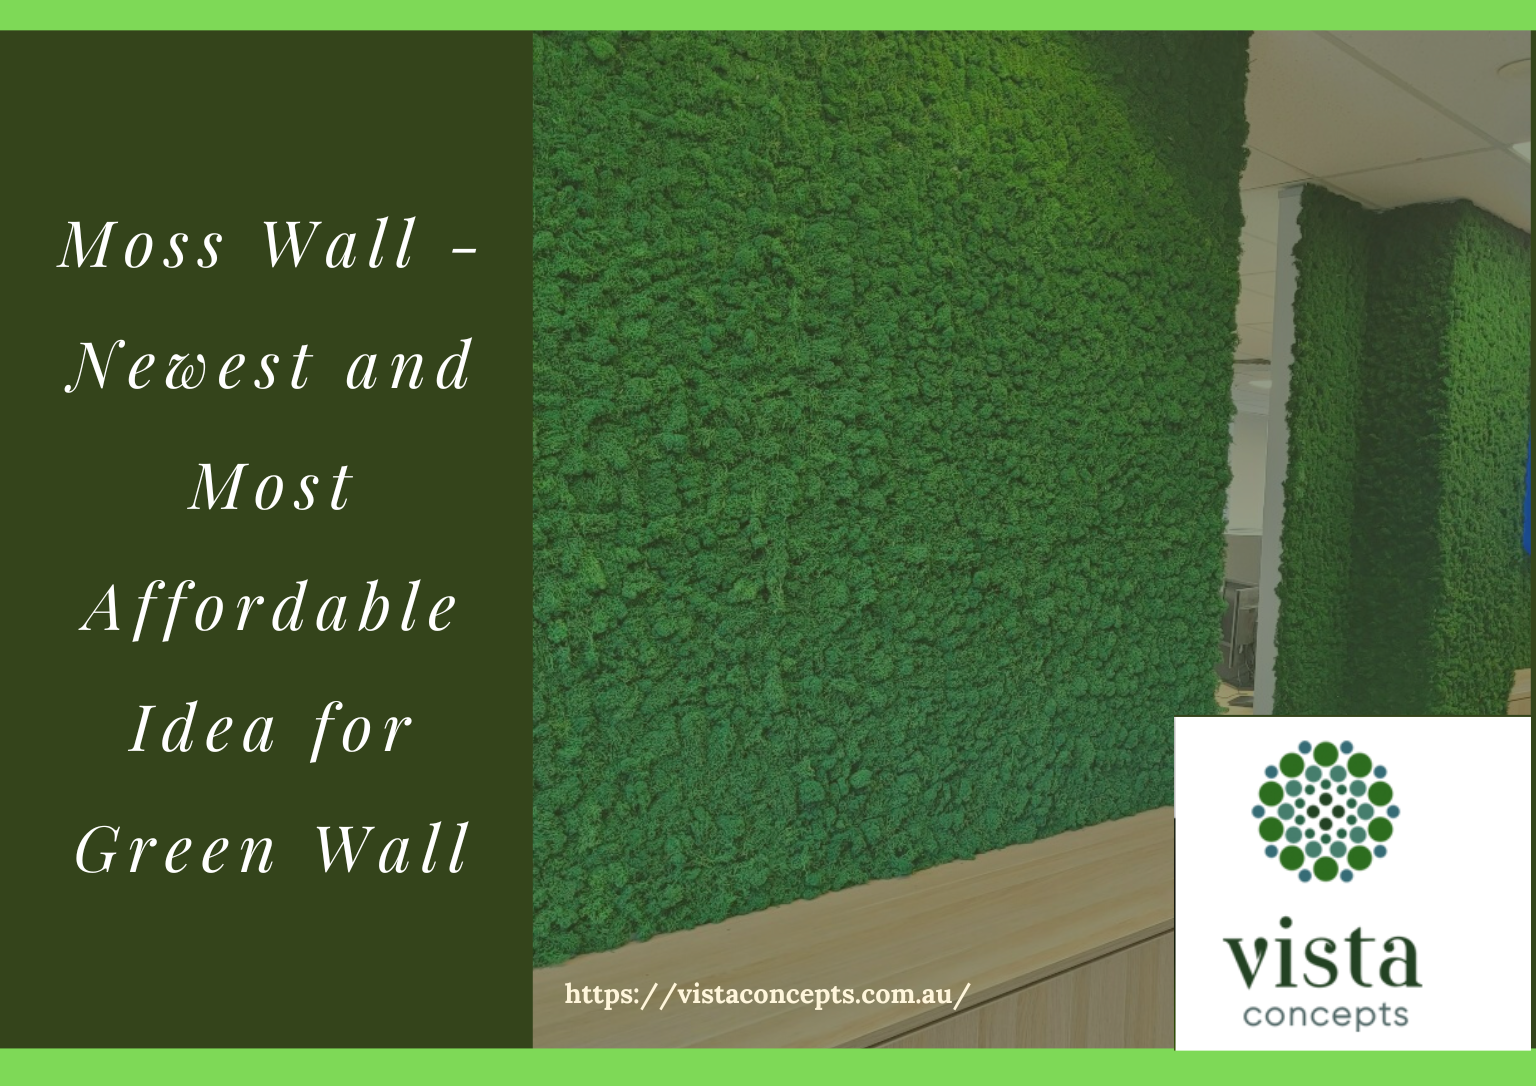 Moss Wall - Newest and Most Affordable Idea for Green Wall moss wall